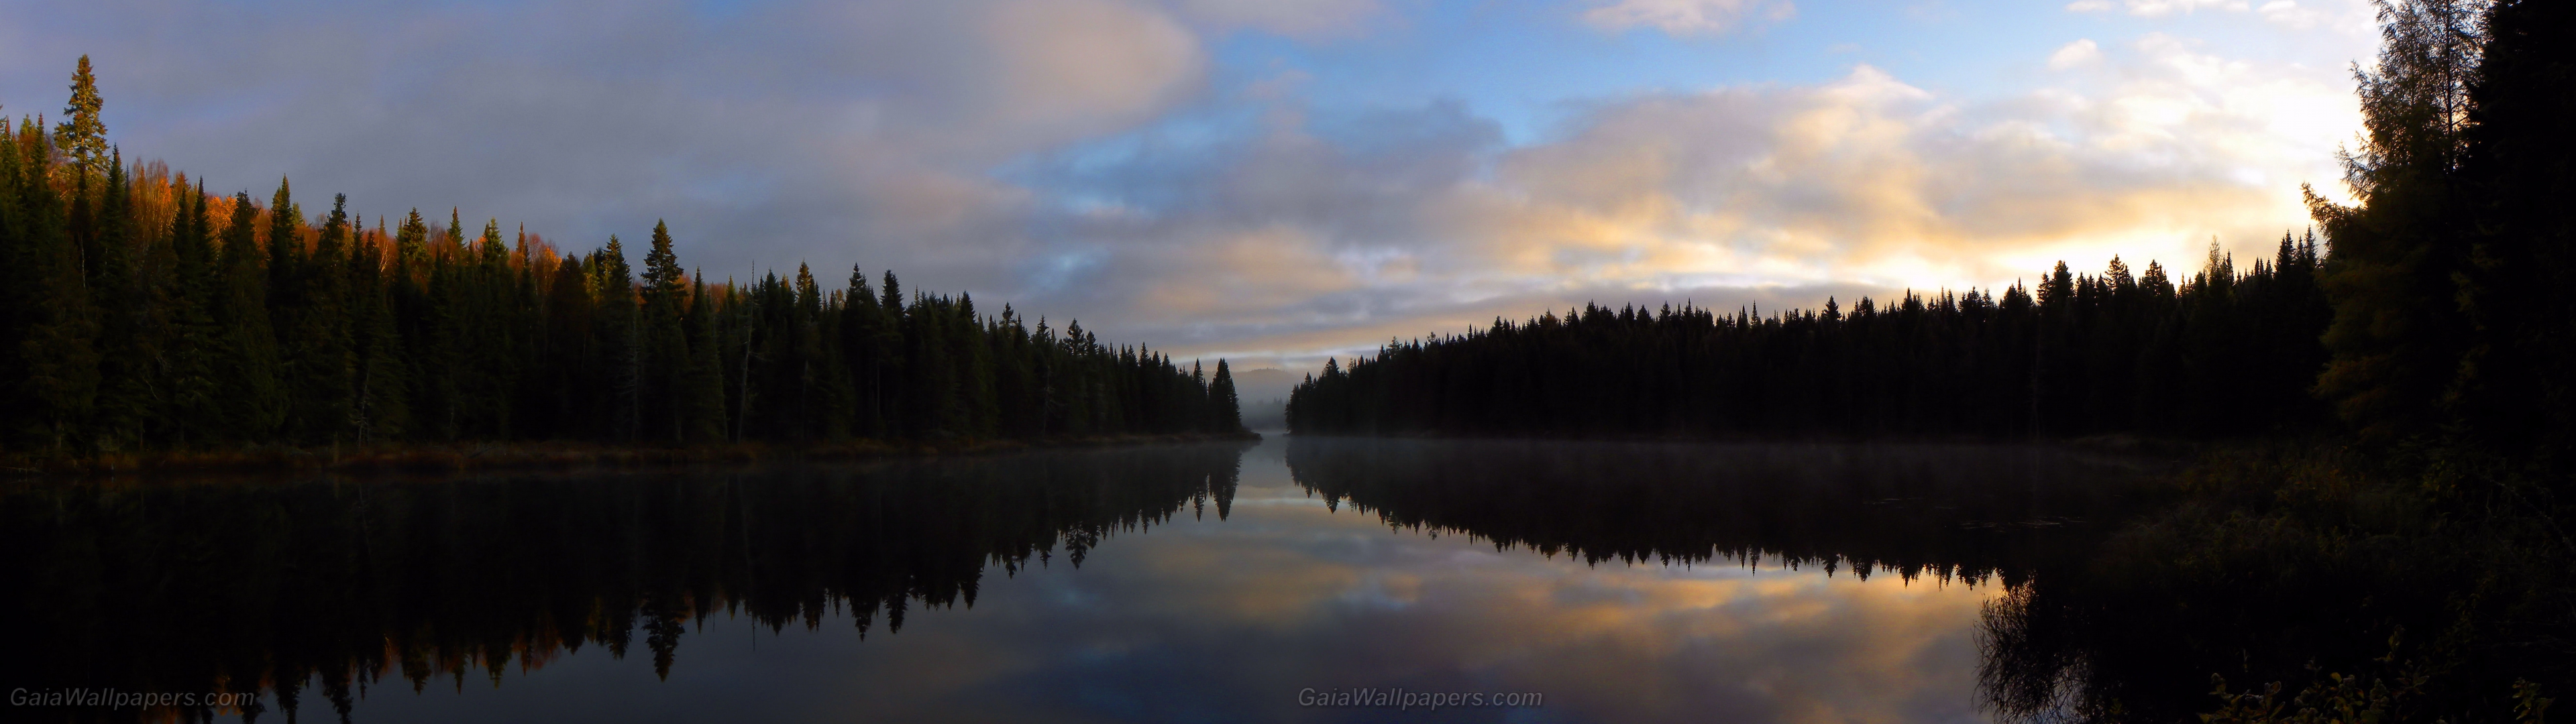 Sunrise in the forest reflected on a calm lake - Free desktop wallpapers